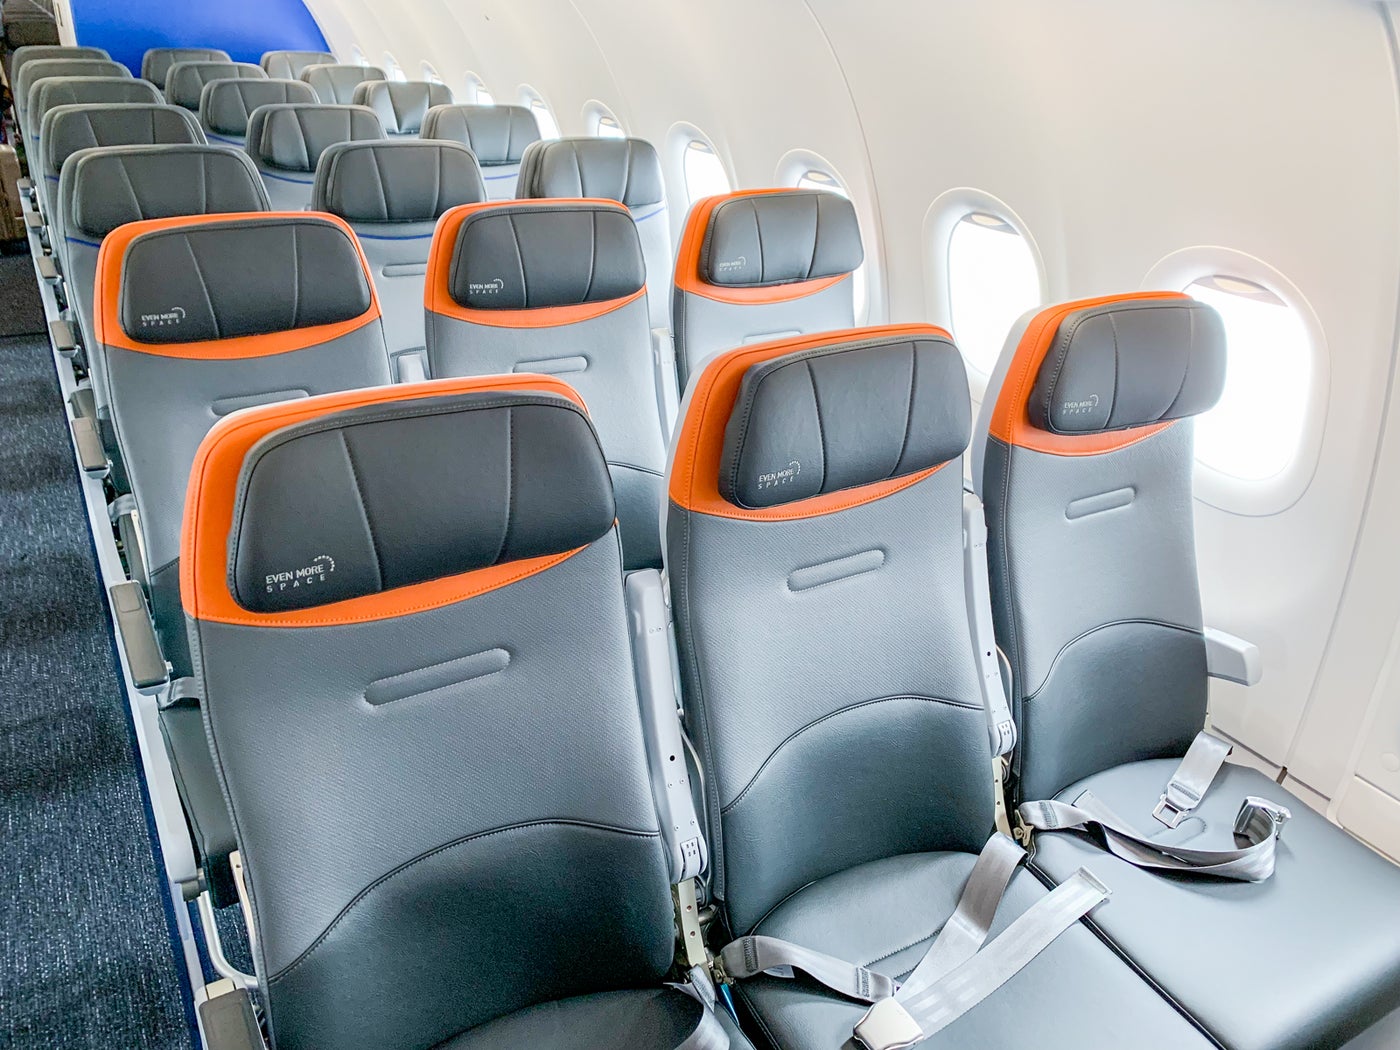 Jetblue Devalues Even More Space Seat Redemptions For Mosaic Members